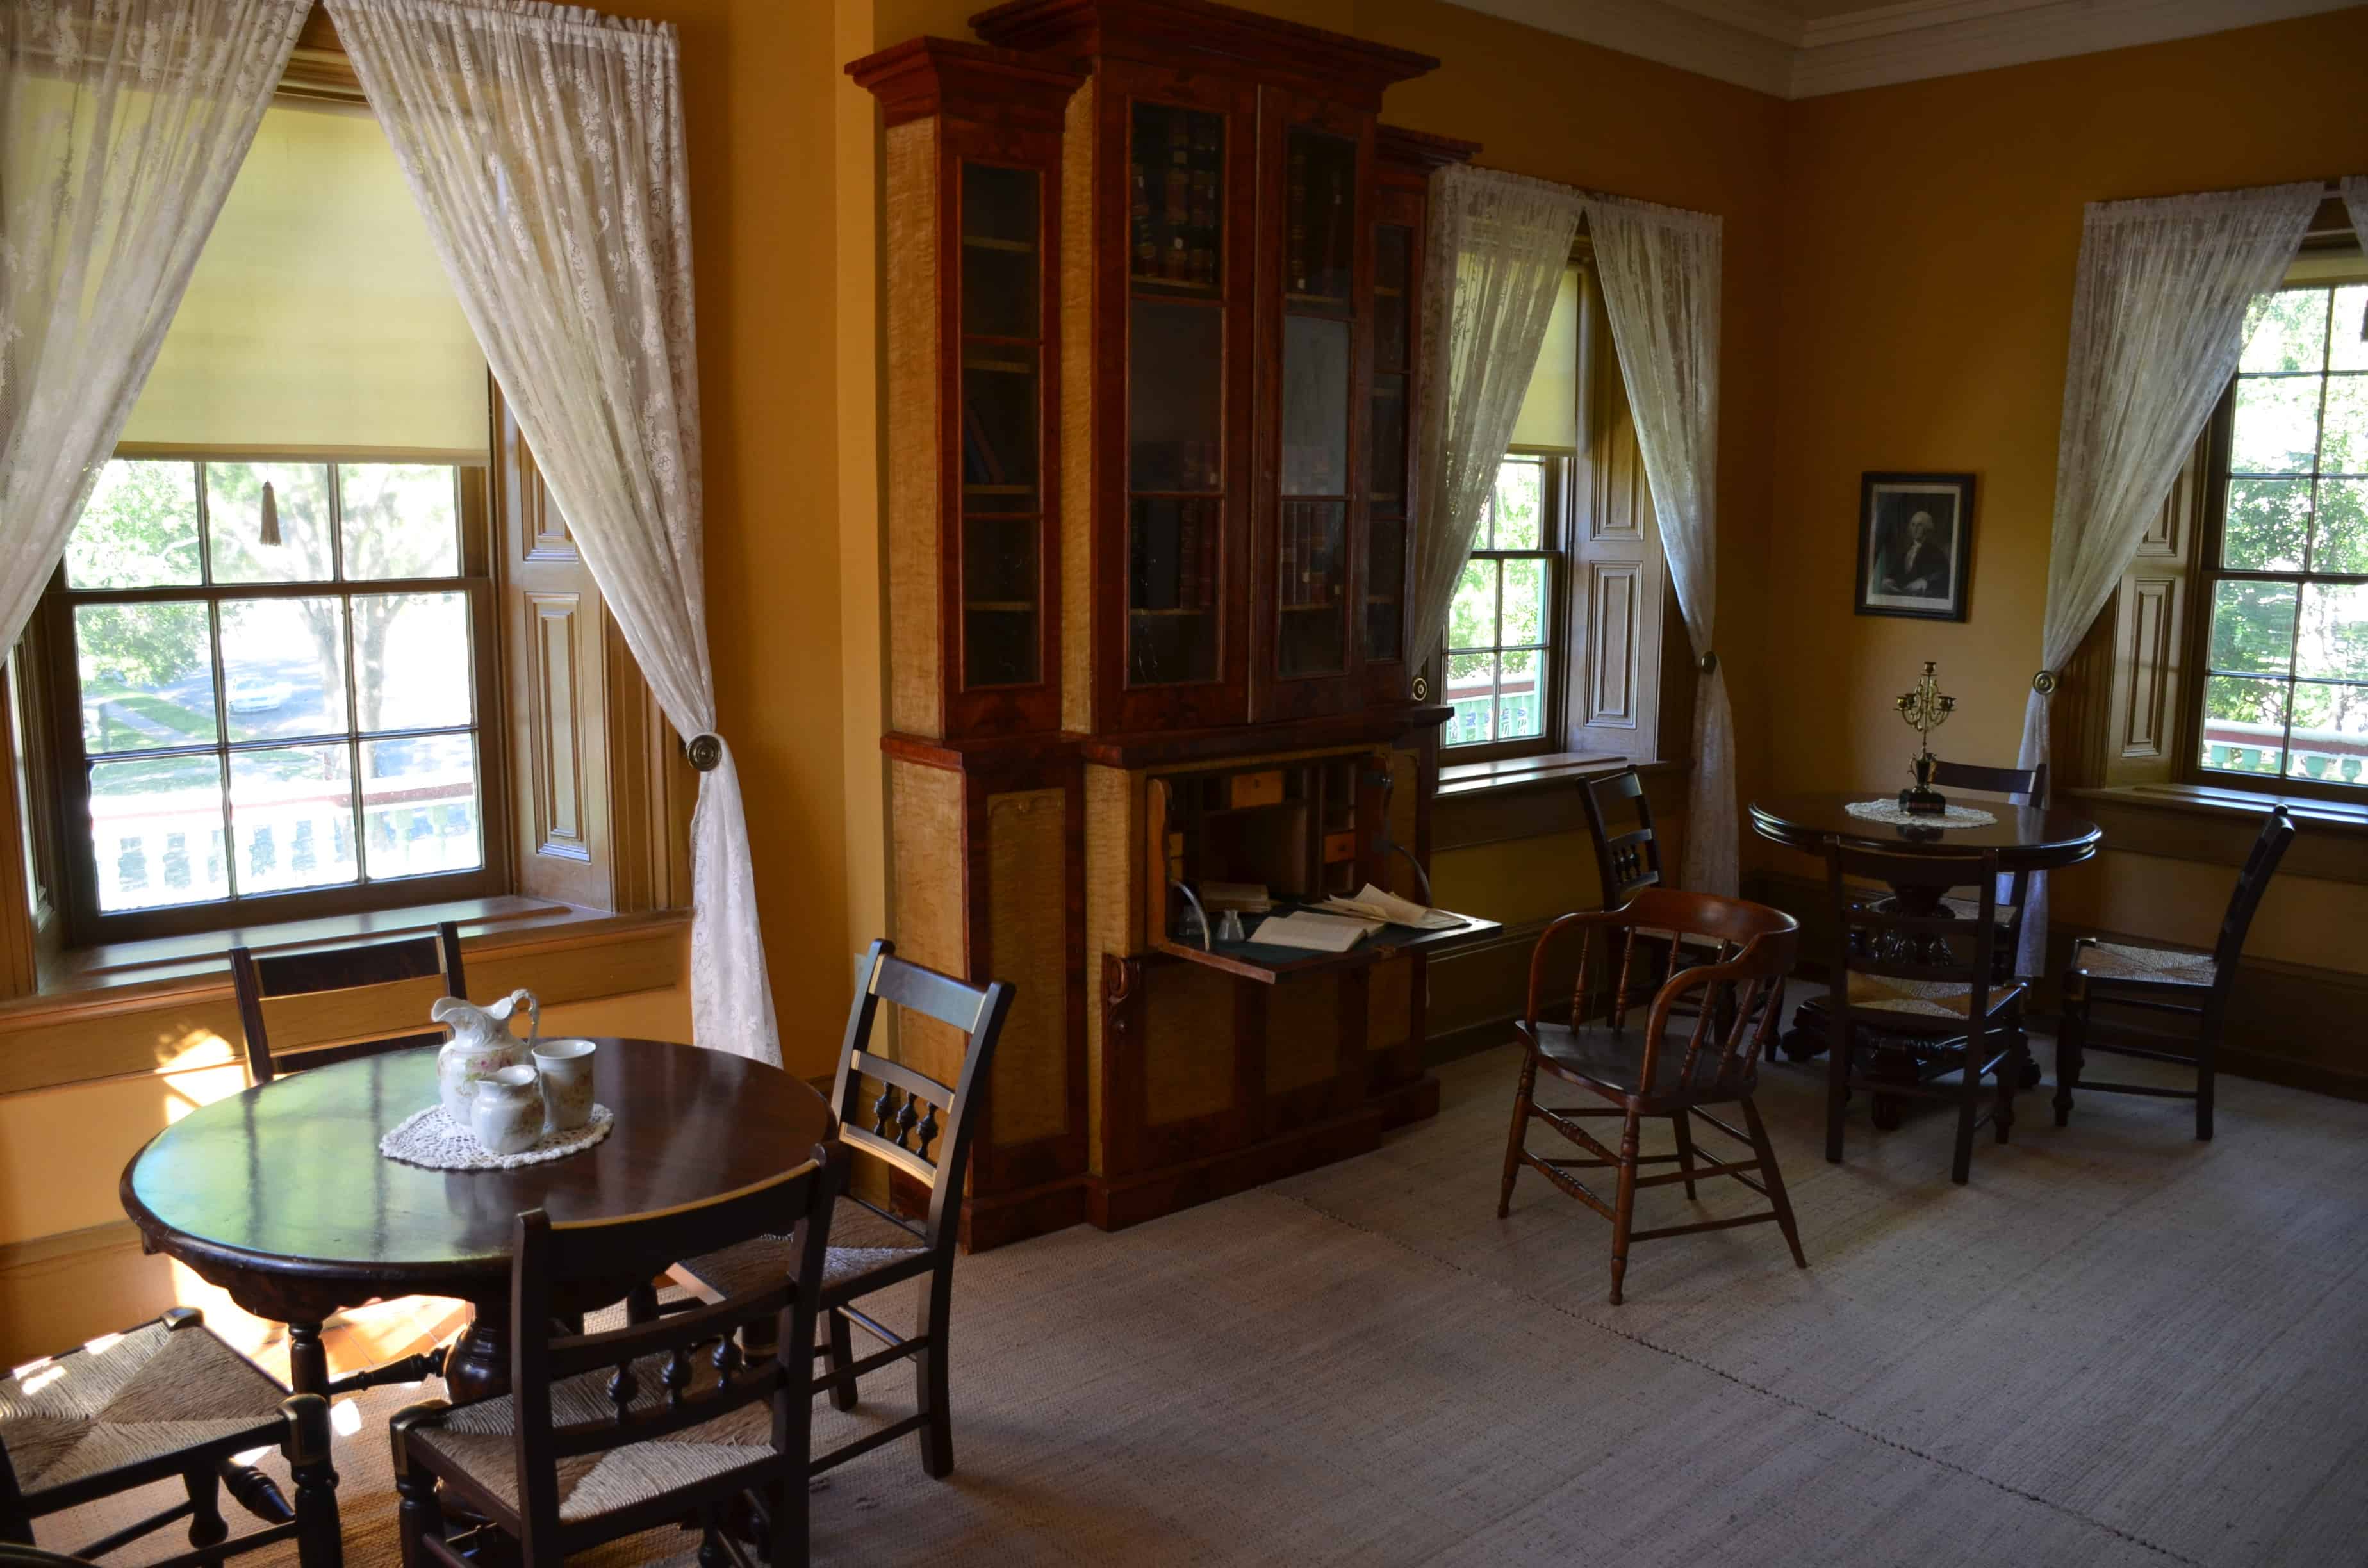 Office at the Brigham Young Winter Home in St. George, Utah